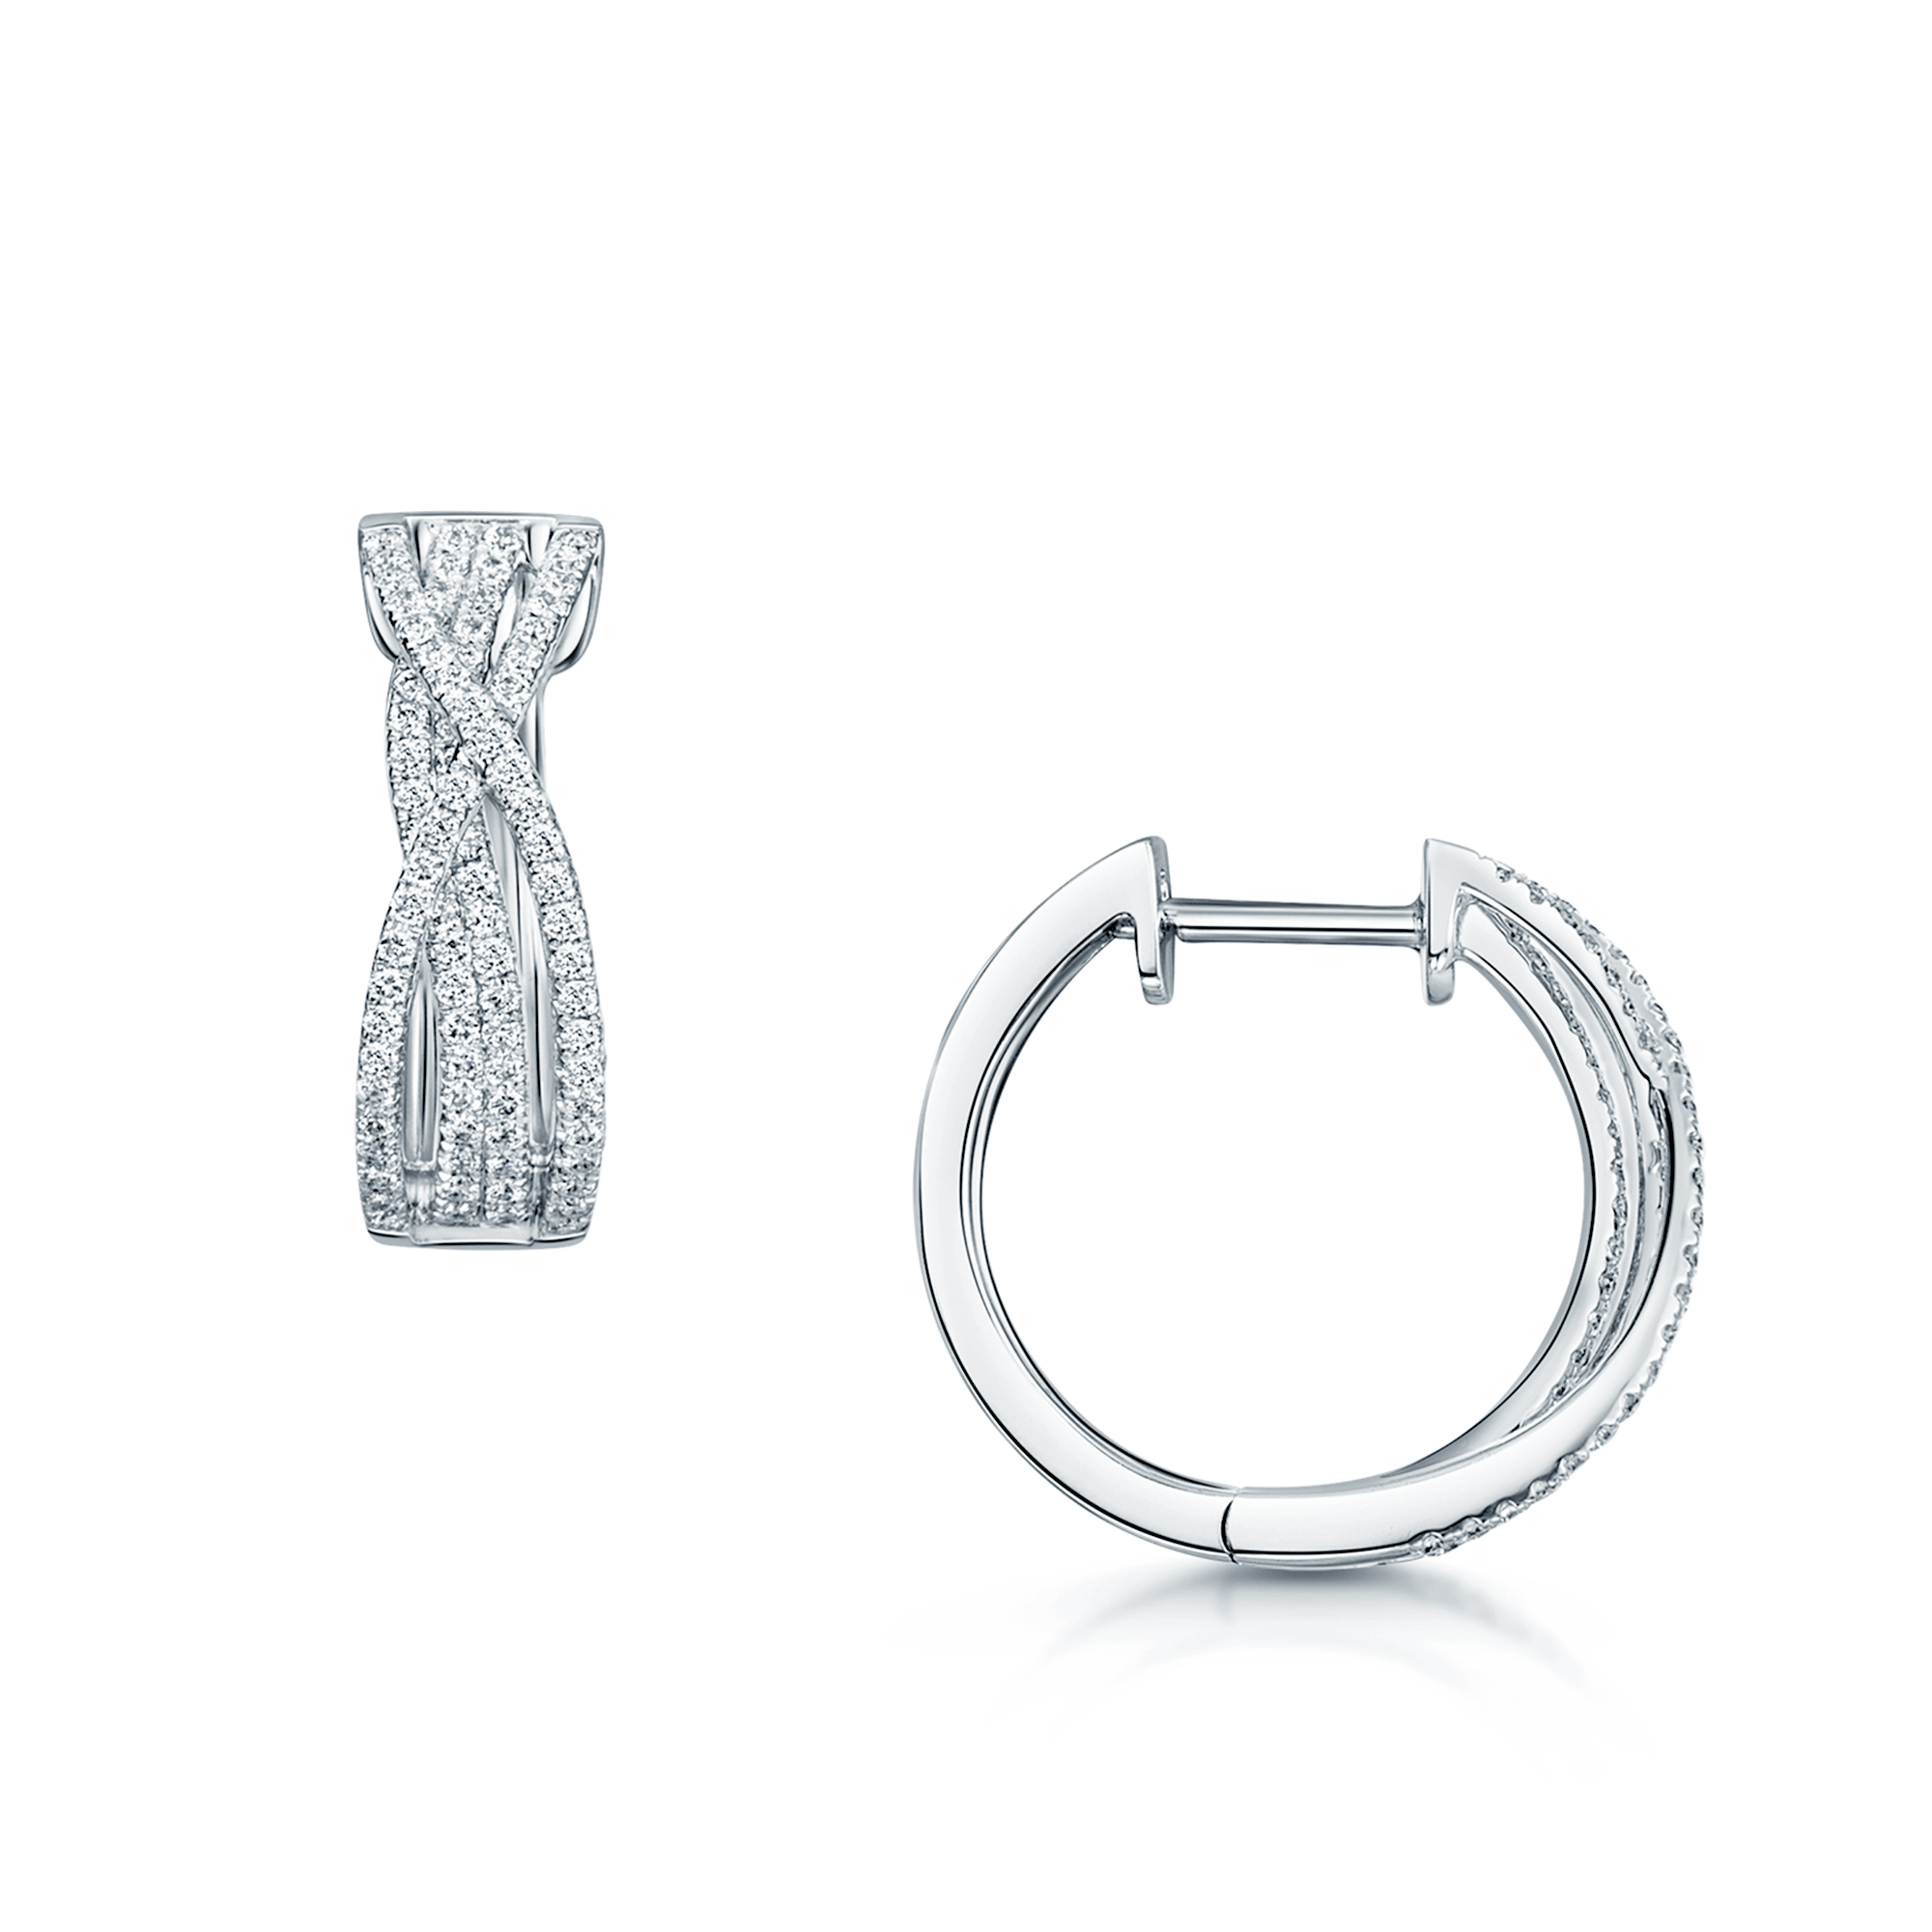 18ct White Gold Cross Over Style Pave Set Diamond Hoop Earrings